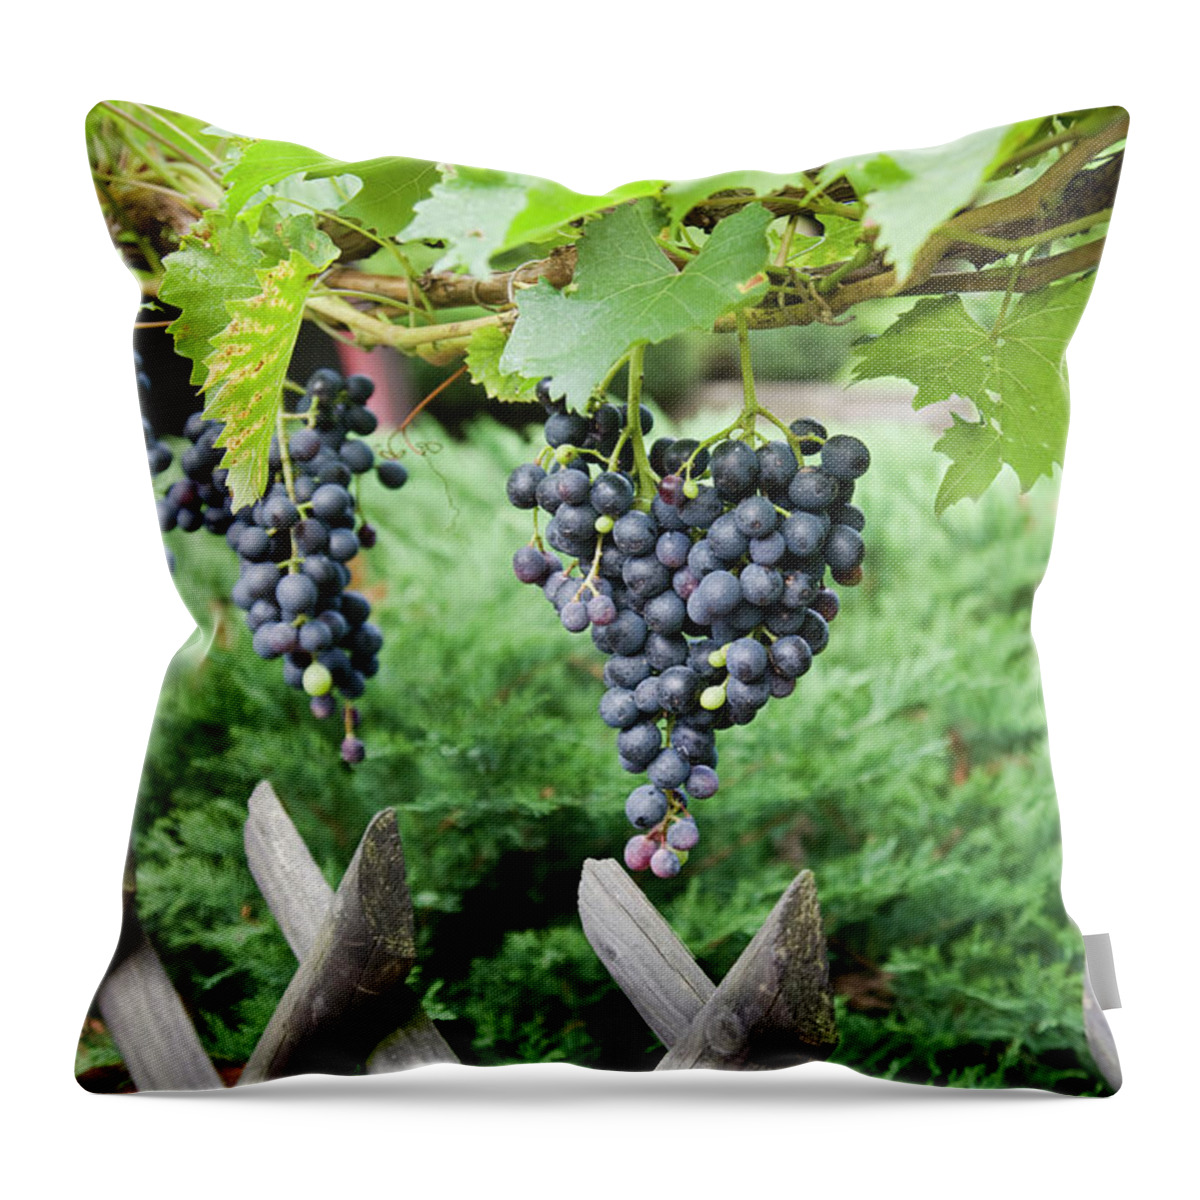 Hanging Throw Pillow featuring the photograph Bountiful Harvest by Diephosi